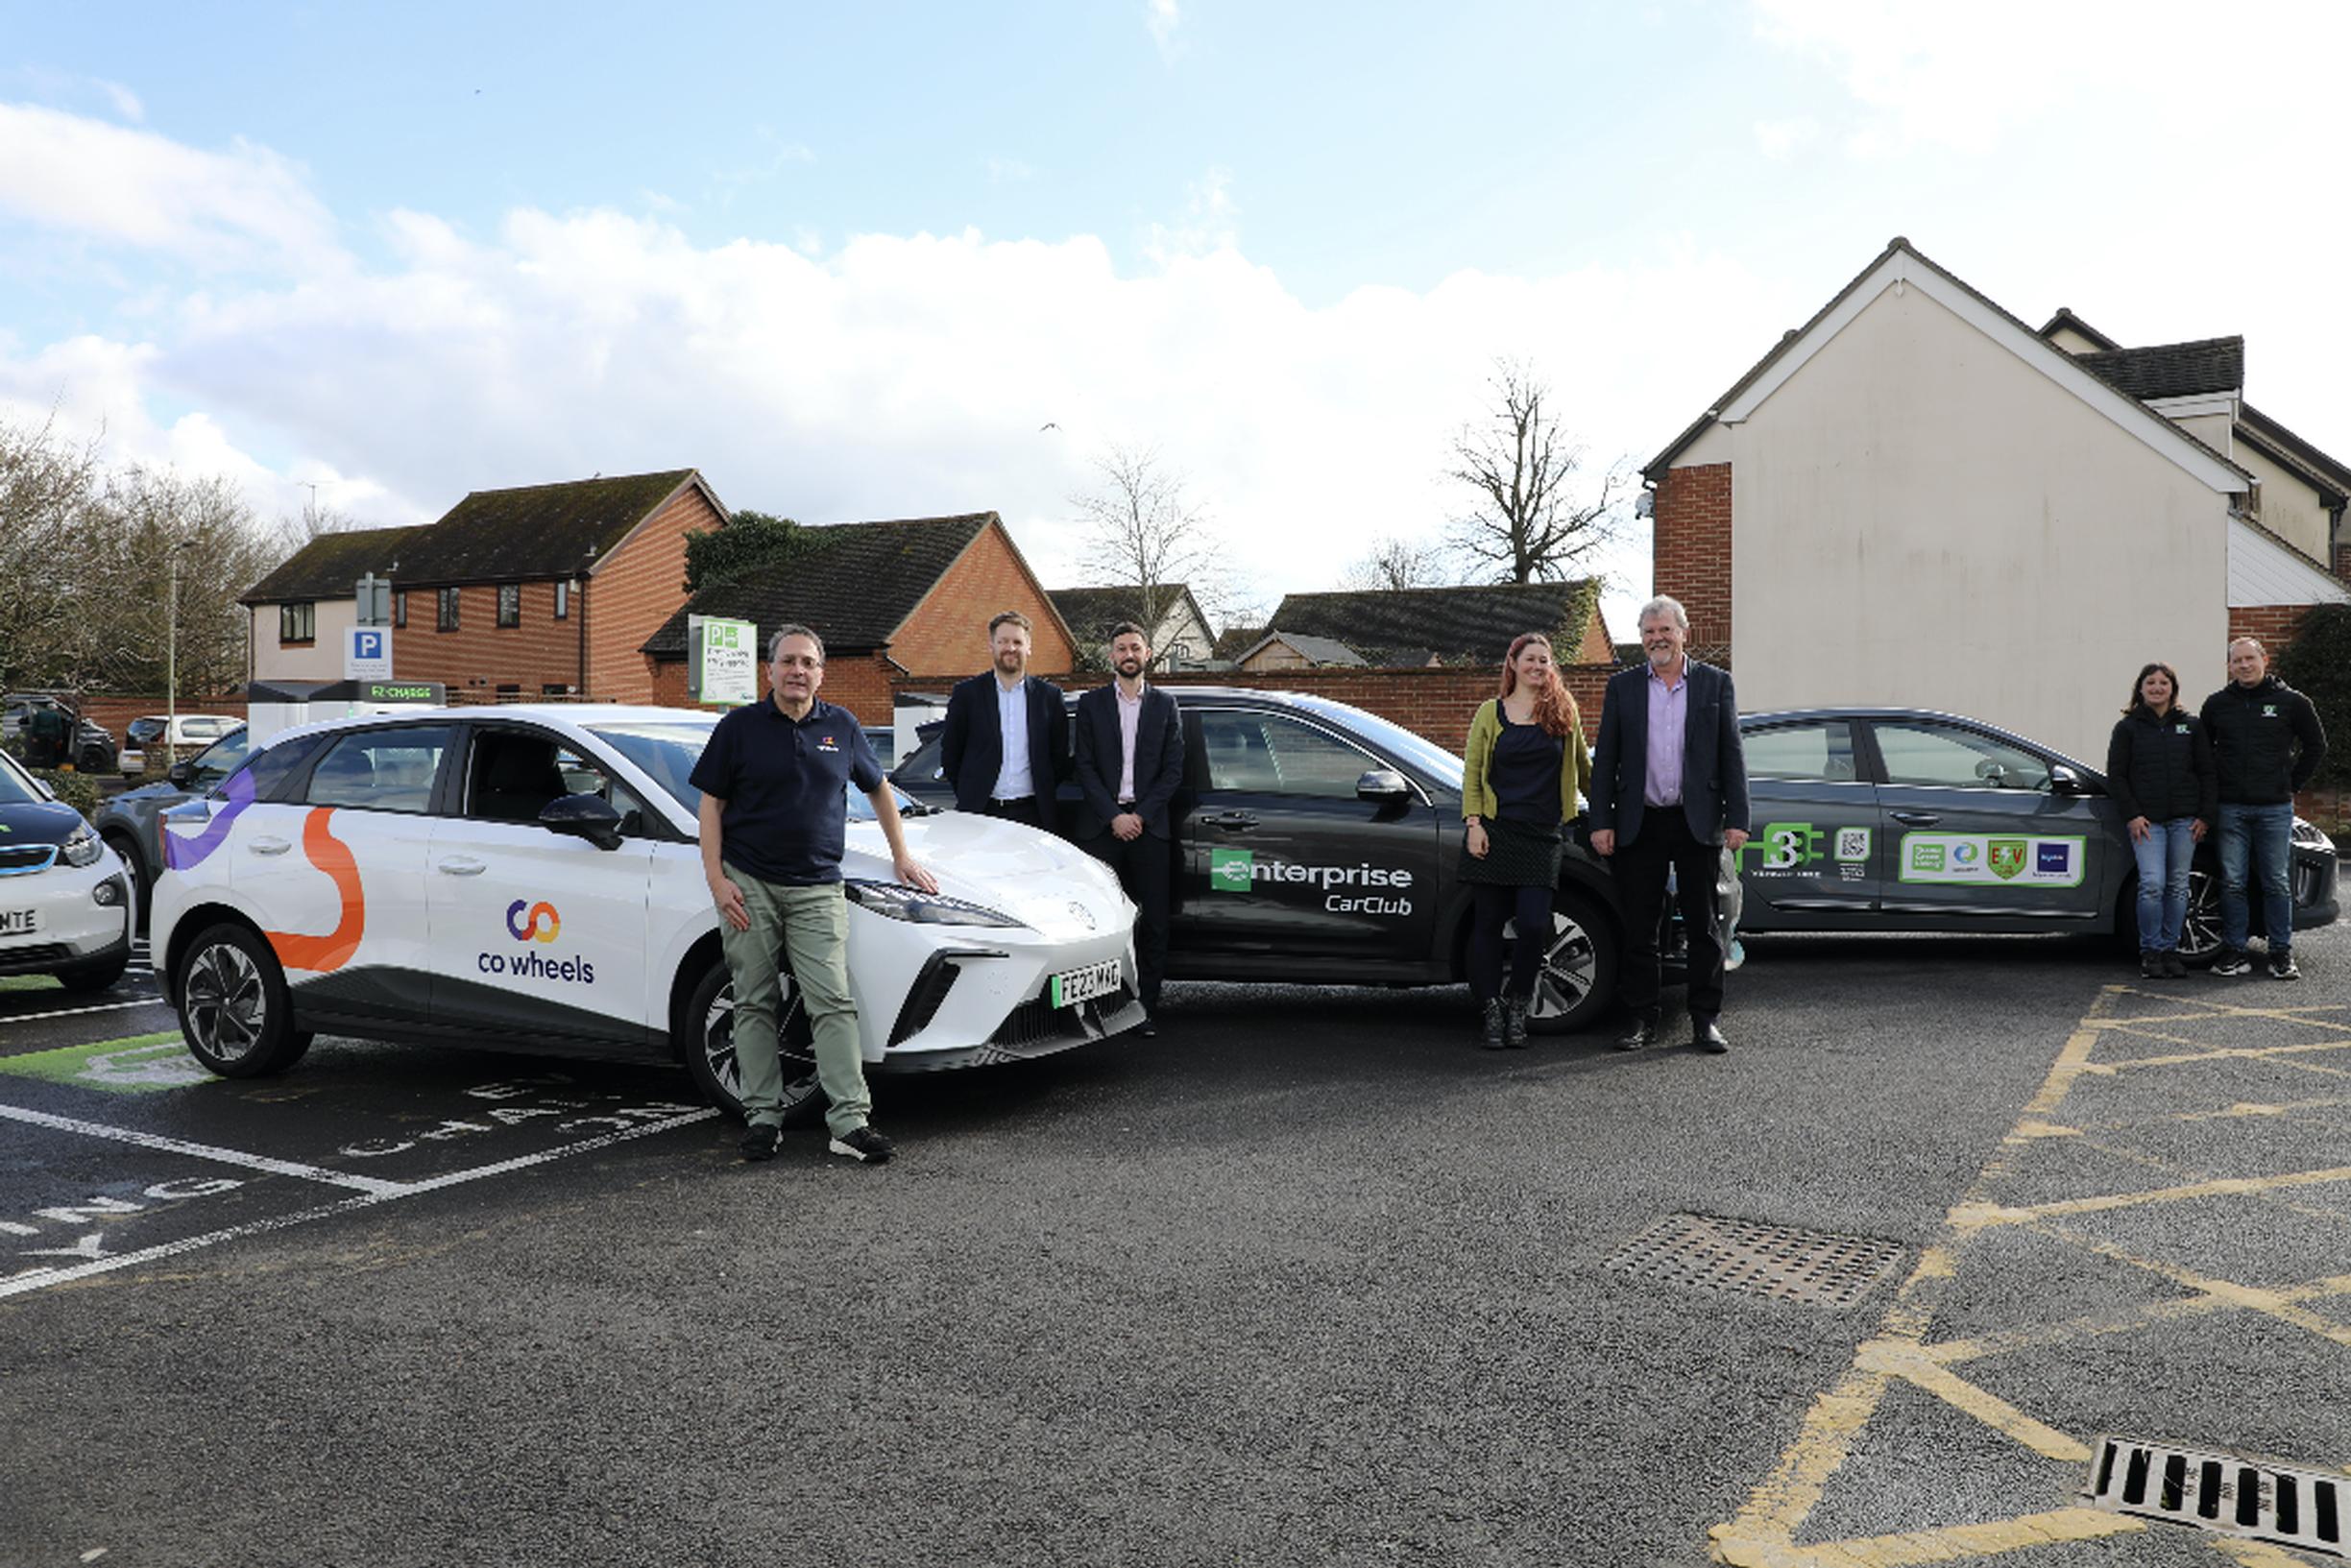 Robert Schopen from Co Wheels, Phillip Wright and Kieran Allen from Enterprise CarClub, Jenny Figueiredo, Oxfordshire County Council’s EV charging project Manager, Phil Shadbolt from EZ-Charge, Rebecca and Ross Batting from Thame EV Hire Club